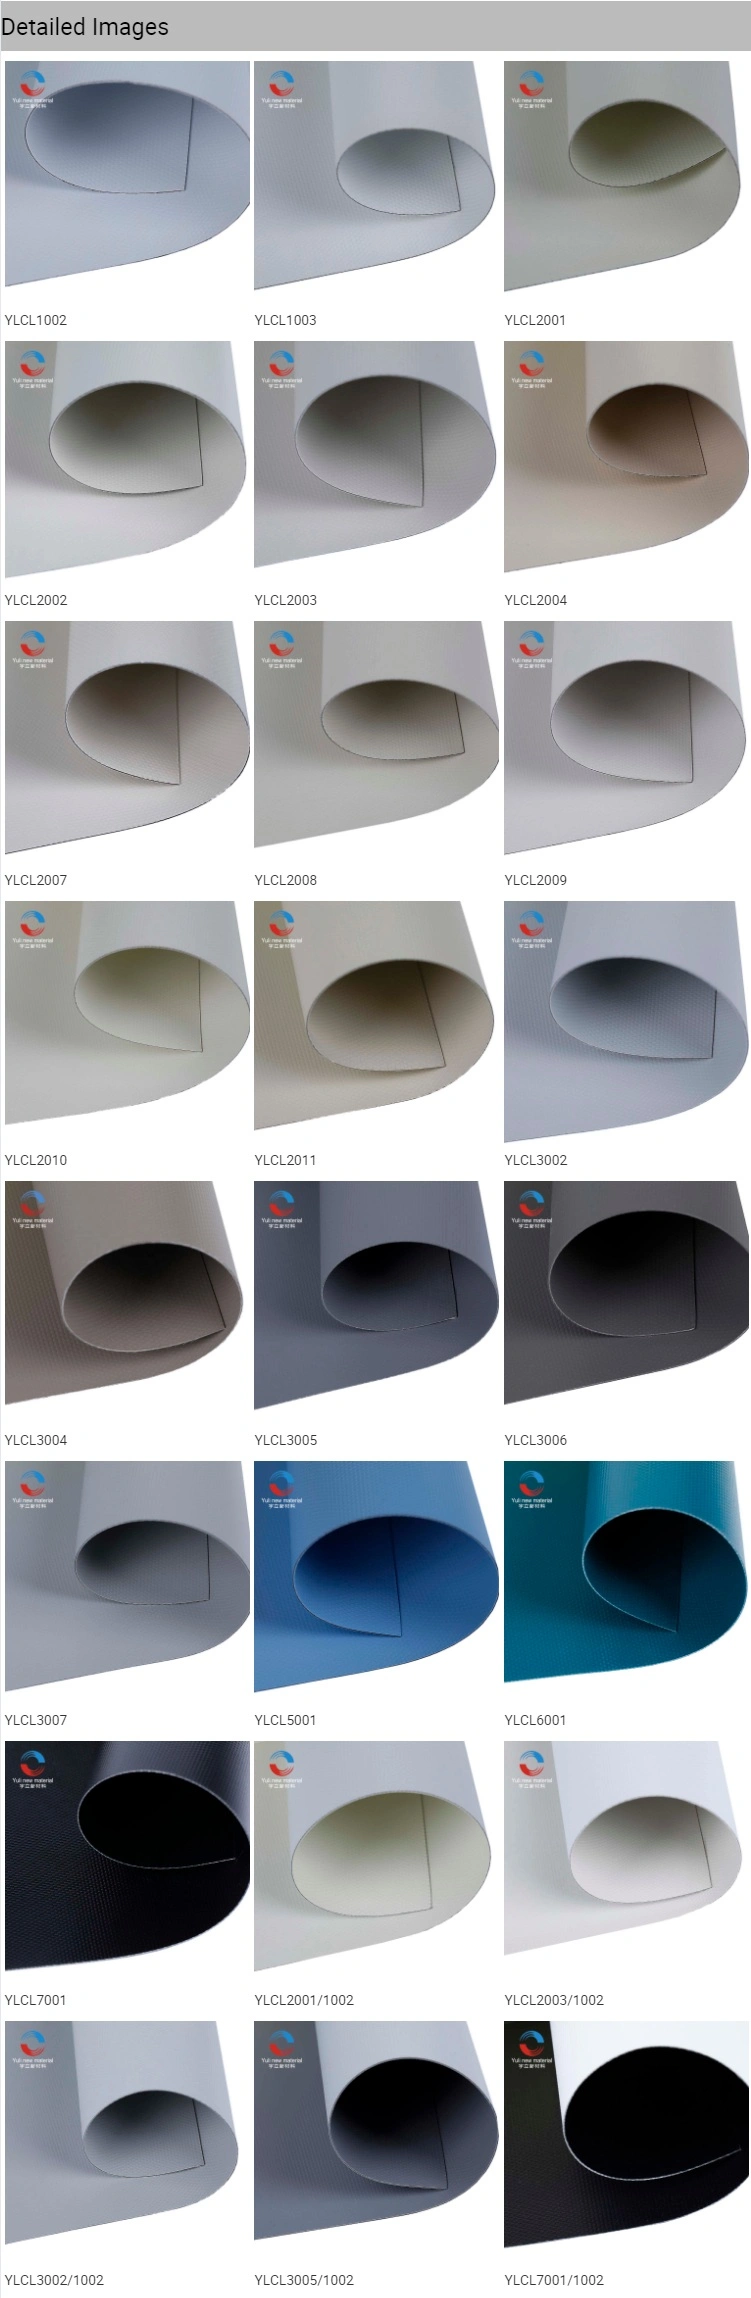 Ylcl6001 Normal Fiberglass Window Curtain Material for Roller Blinds Sunshade